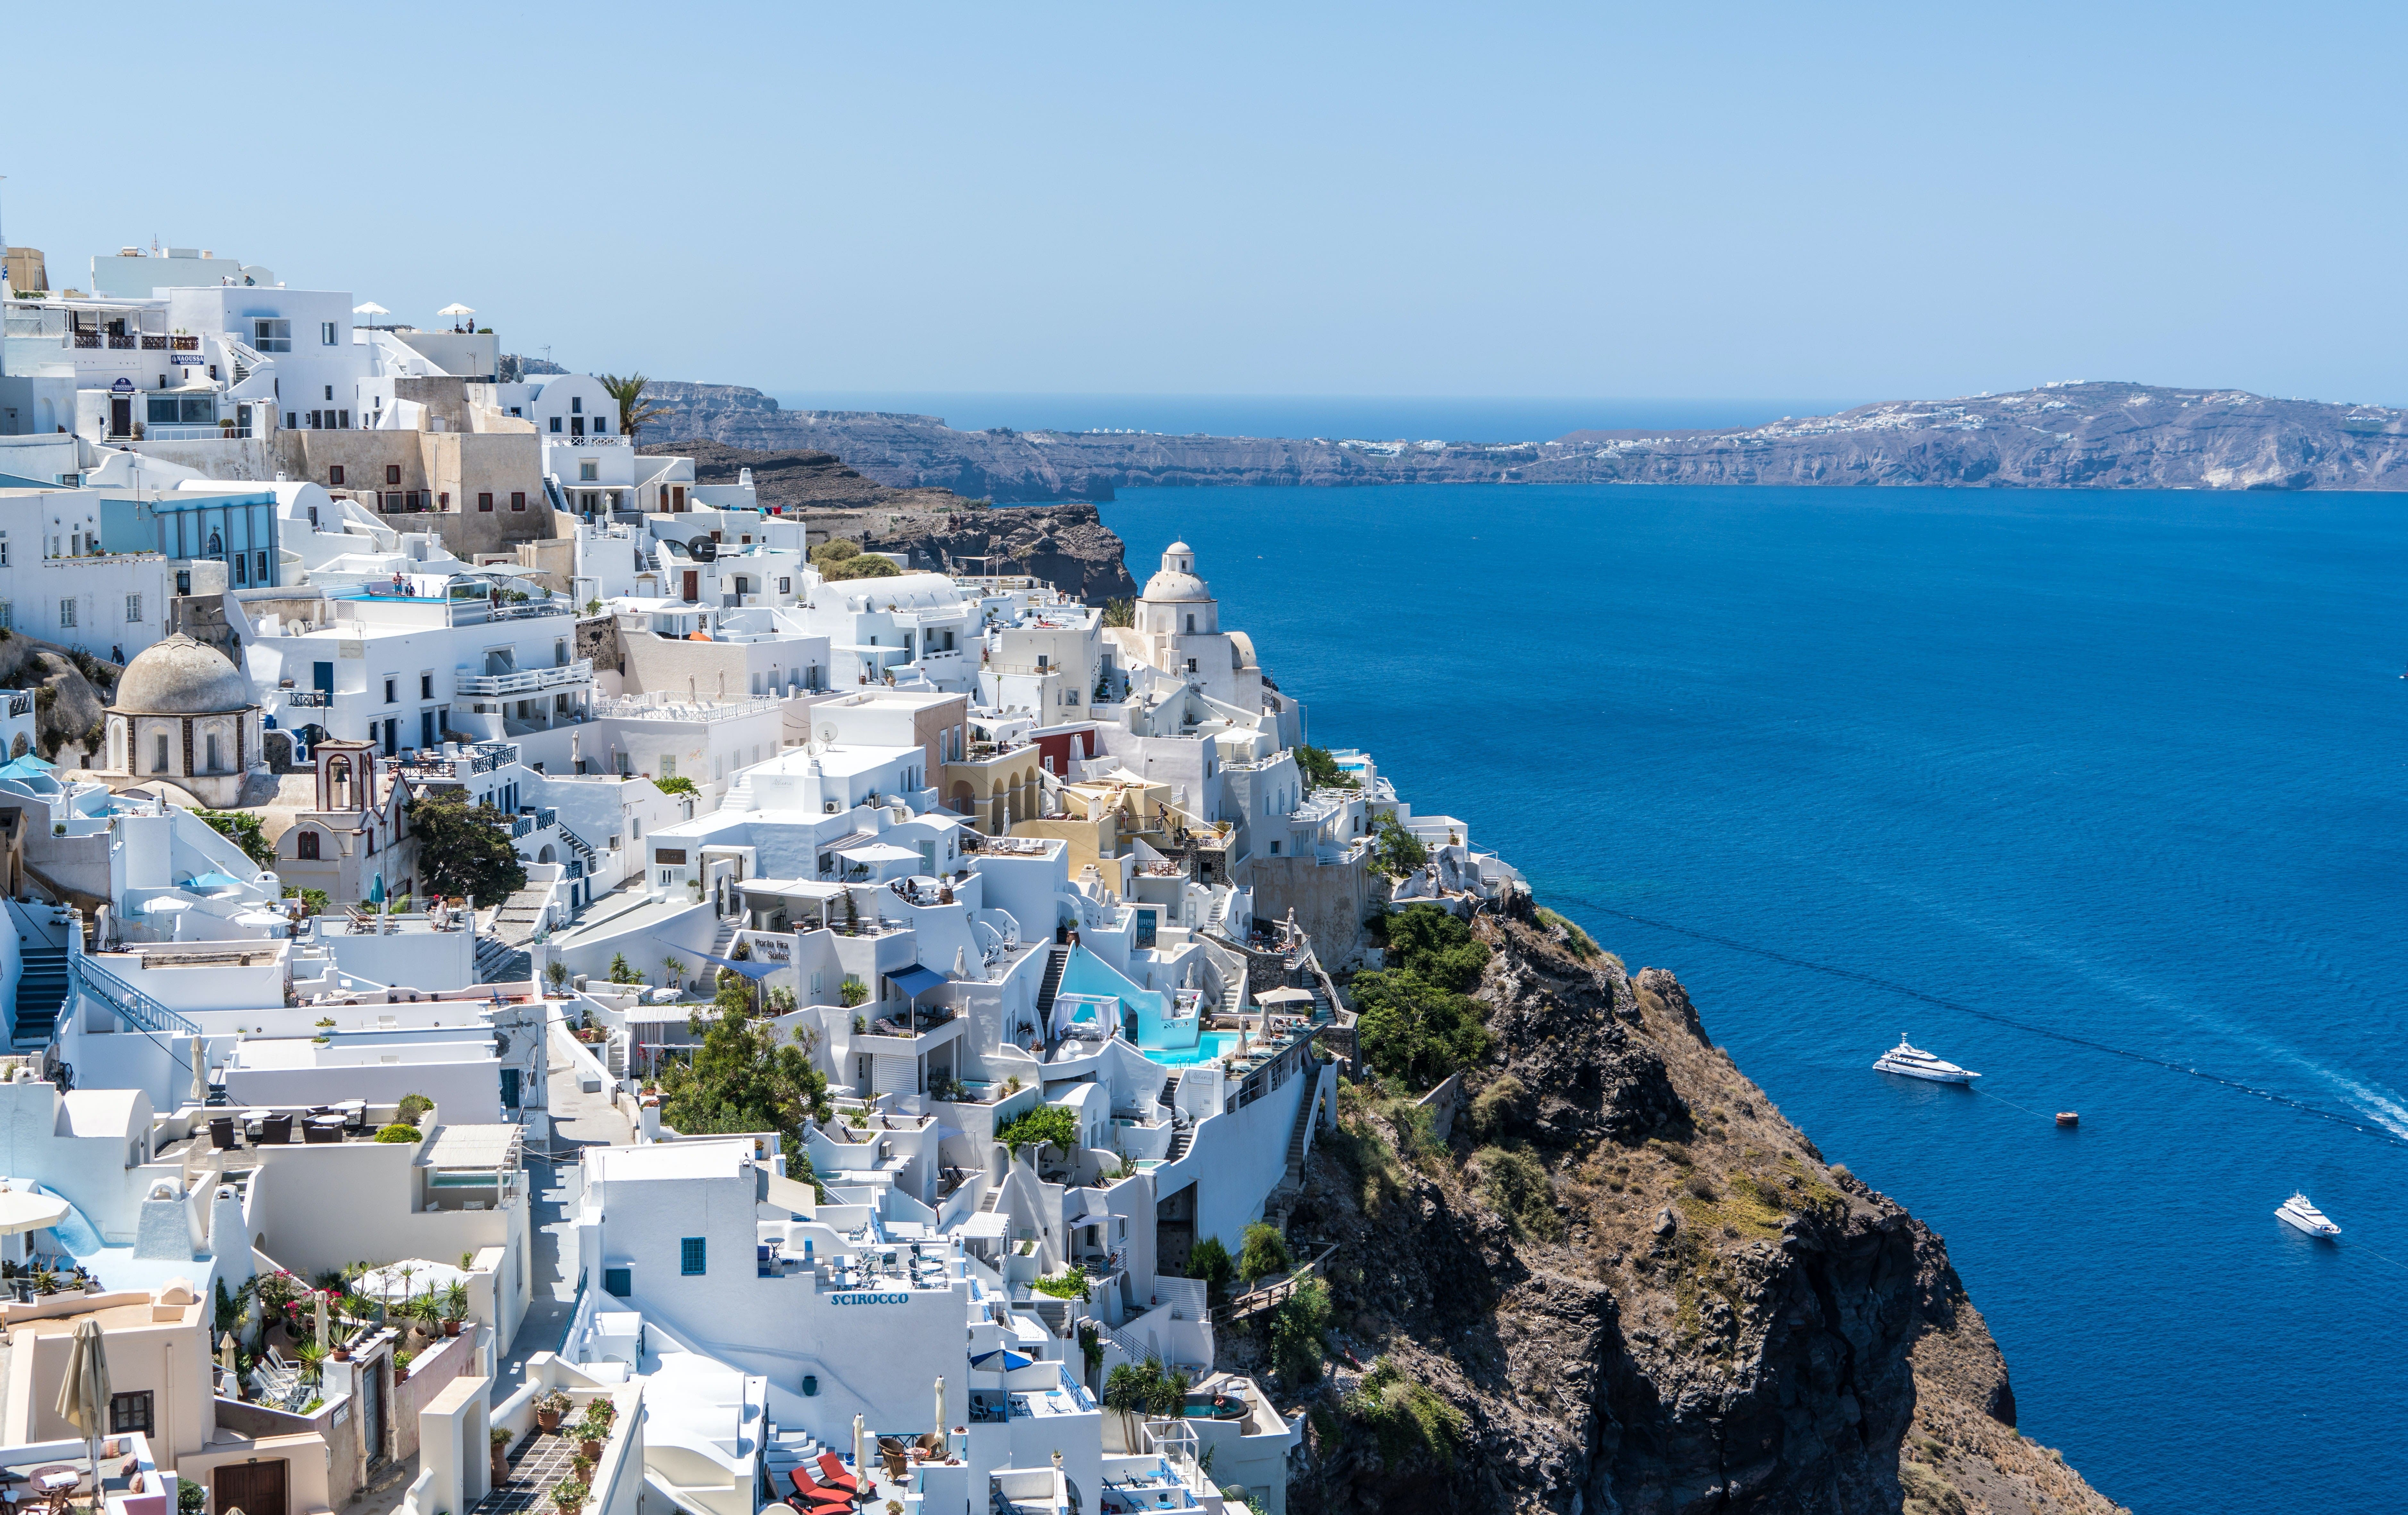 Marvel at the breathtaking vistas of Greece, where ancient wonders meet the sparkling embrace of azure waters. Entrust your next adventure to DREW TRAVEL.